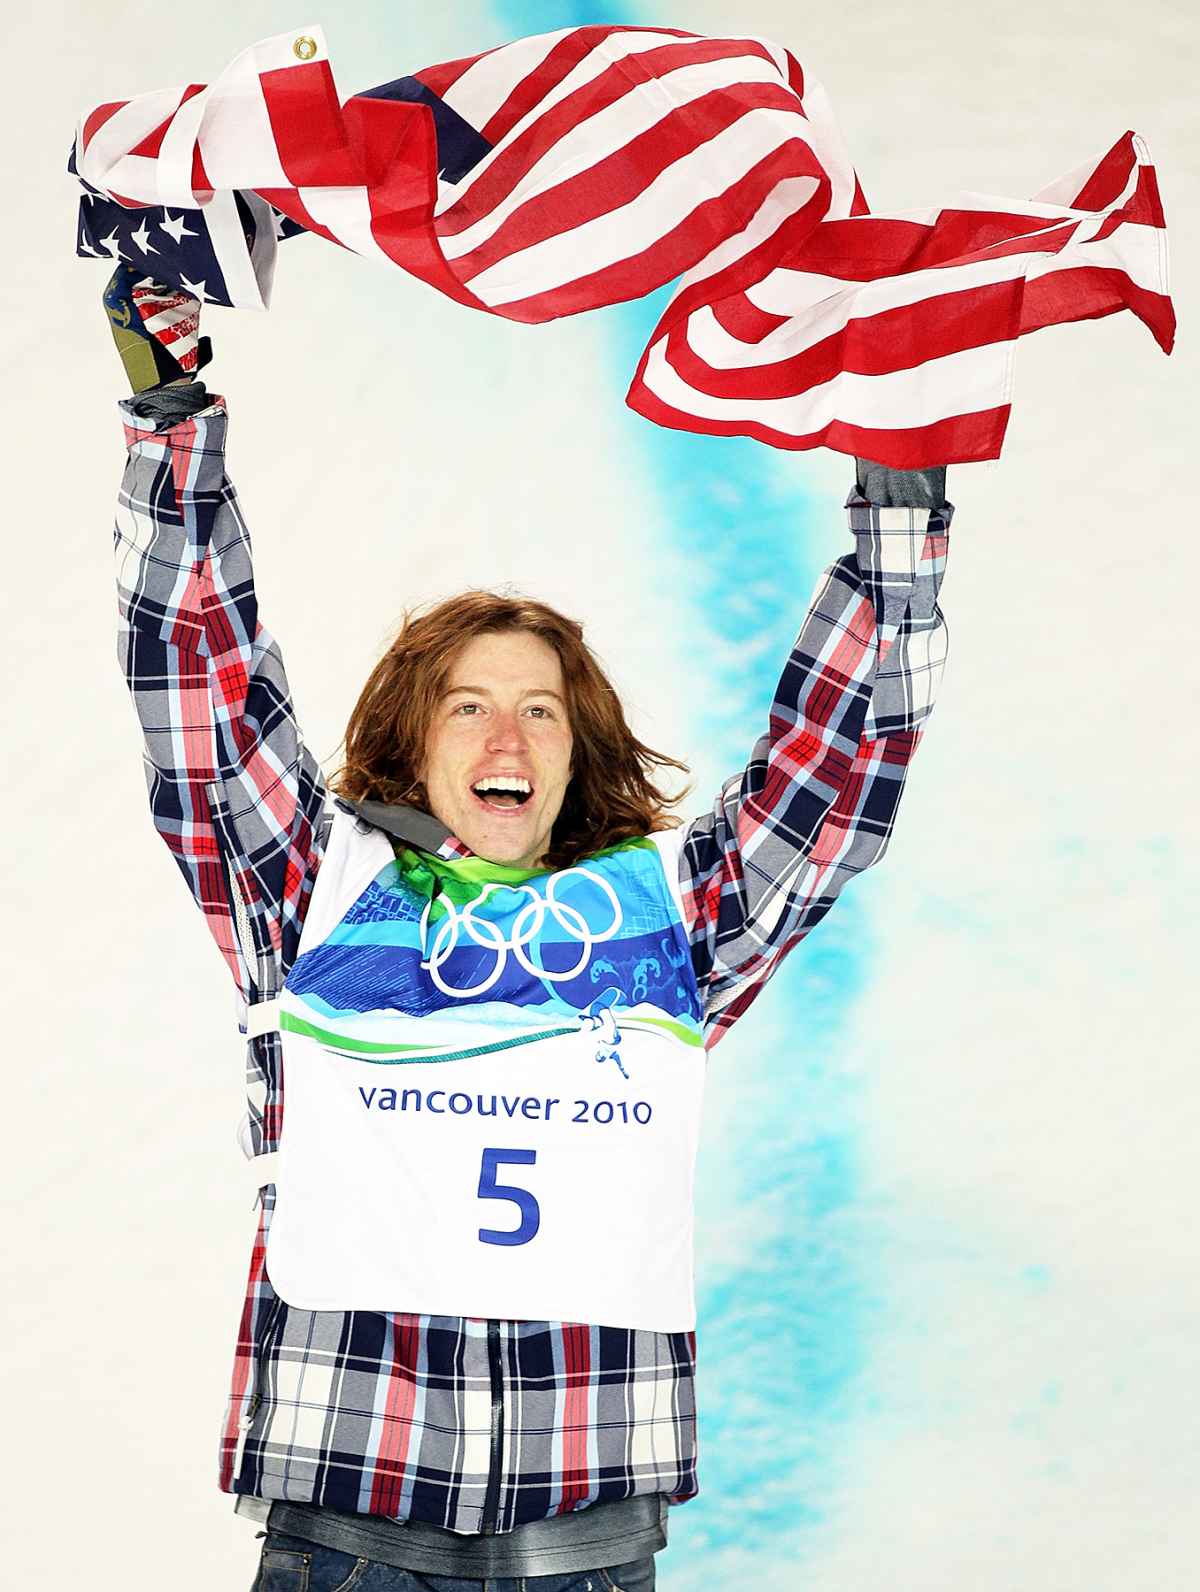 Shaun White's x-factor makes him an American idol at Vancouver